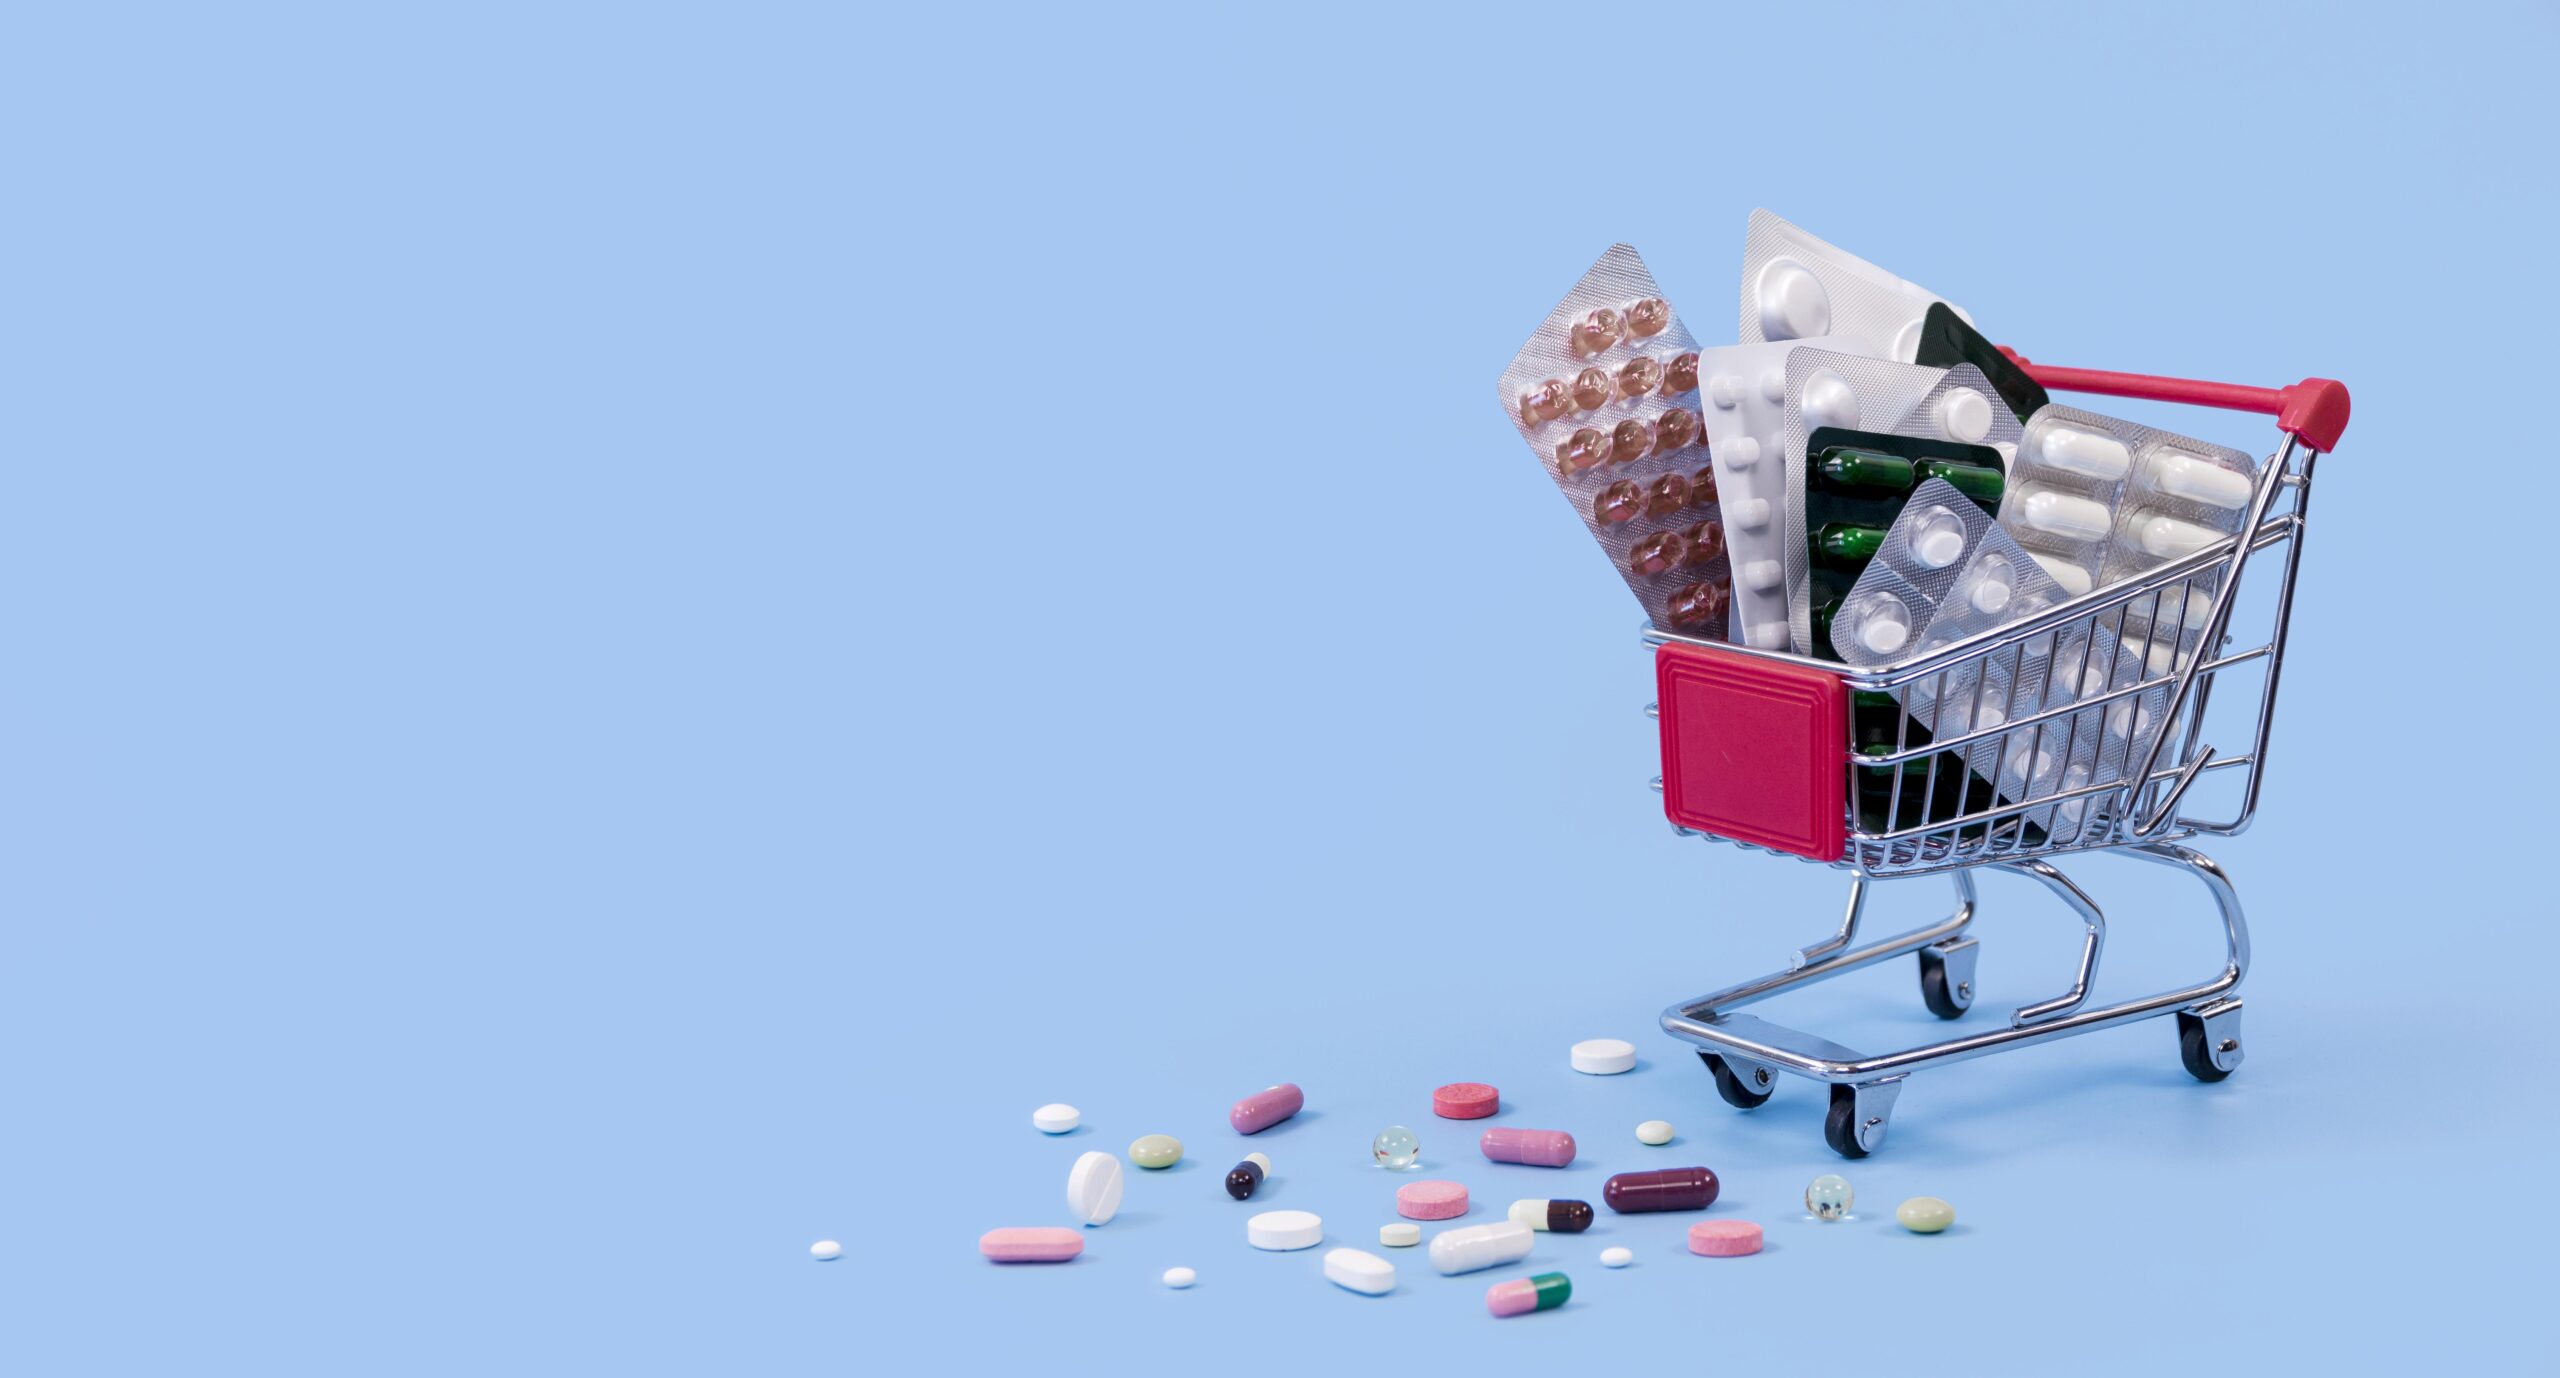 shopping-cart-with-pill-foils-copy-space